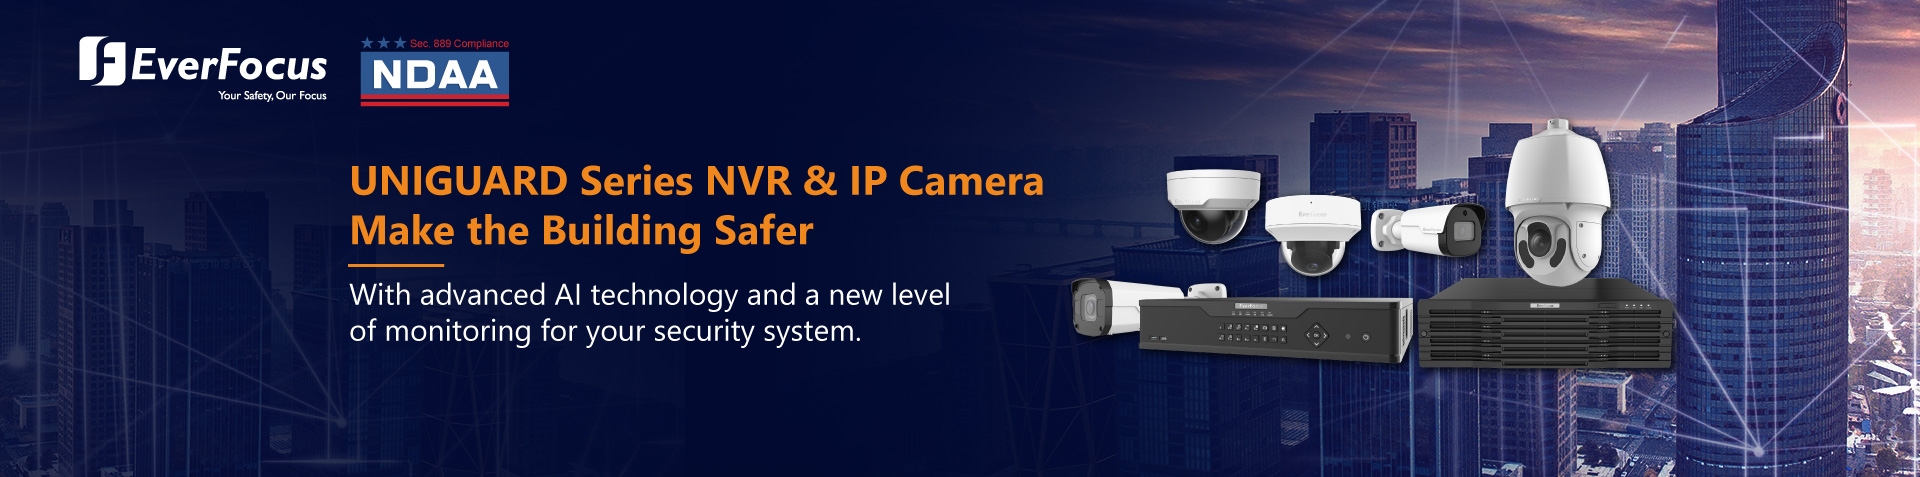 Make Buildings Smarter and Safer! Introducing the UNIGUARD Series NVR by Adopting Intel’s High-performance AI Technology and IP Cameras